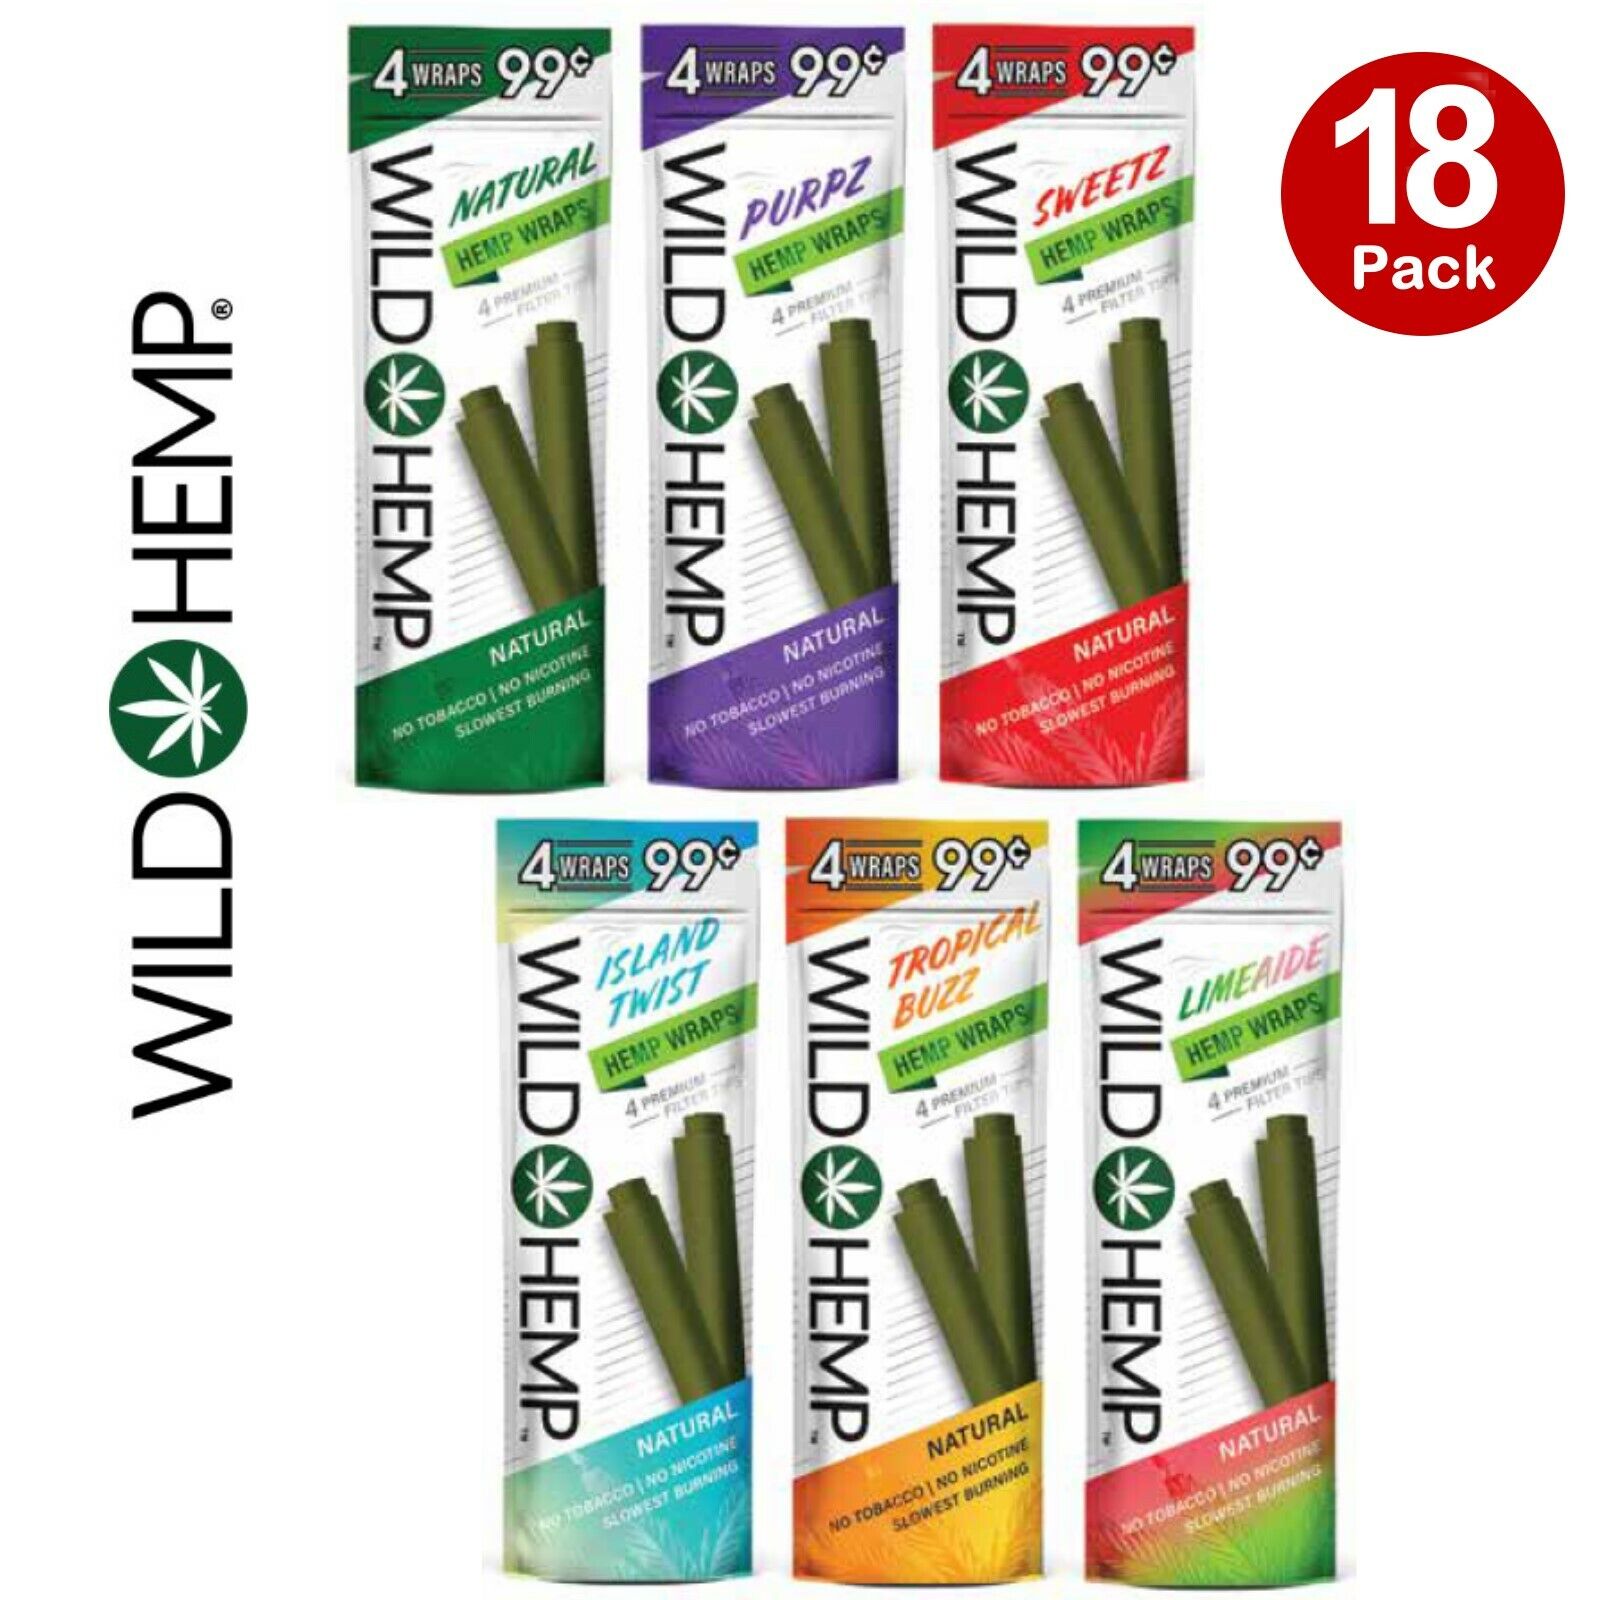 Wild H. Organic Wrap Variety Pack 18 Pouches, 4 Per Pouch - 72 Wraps Total